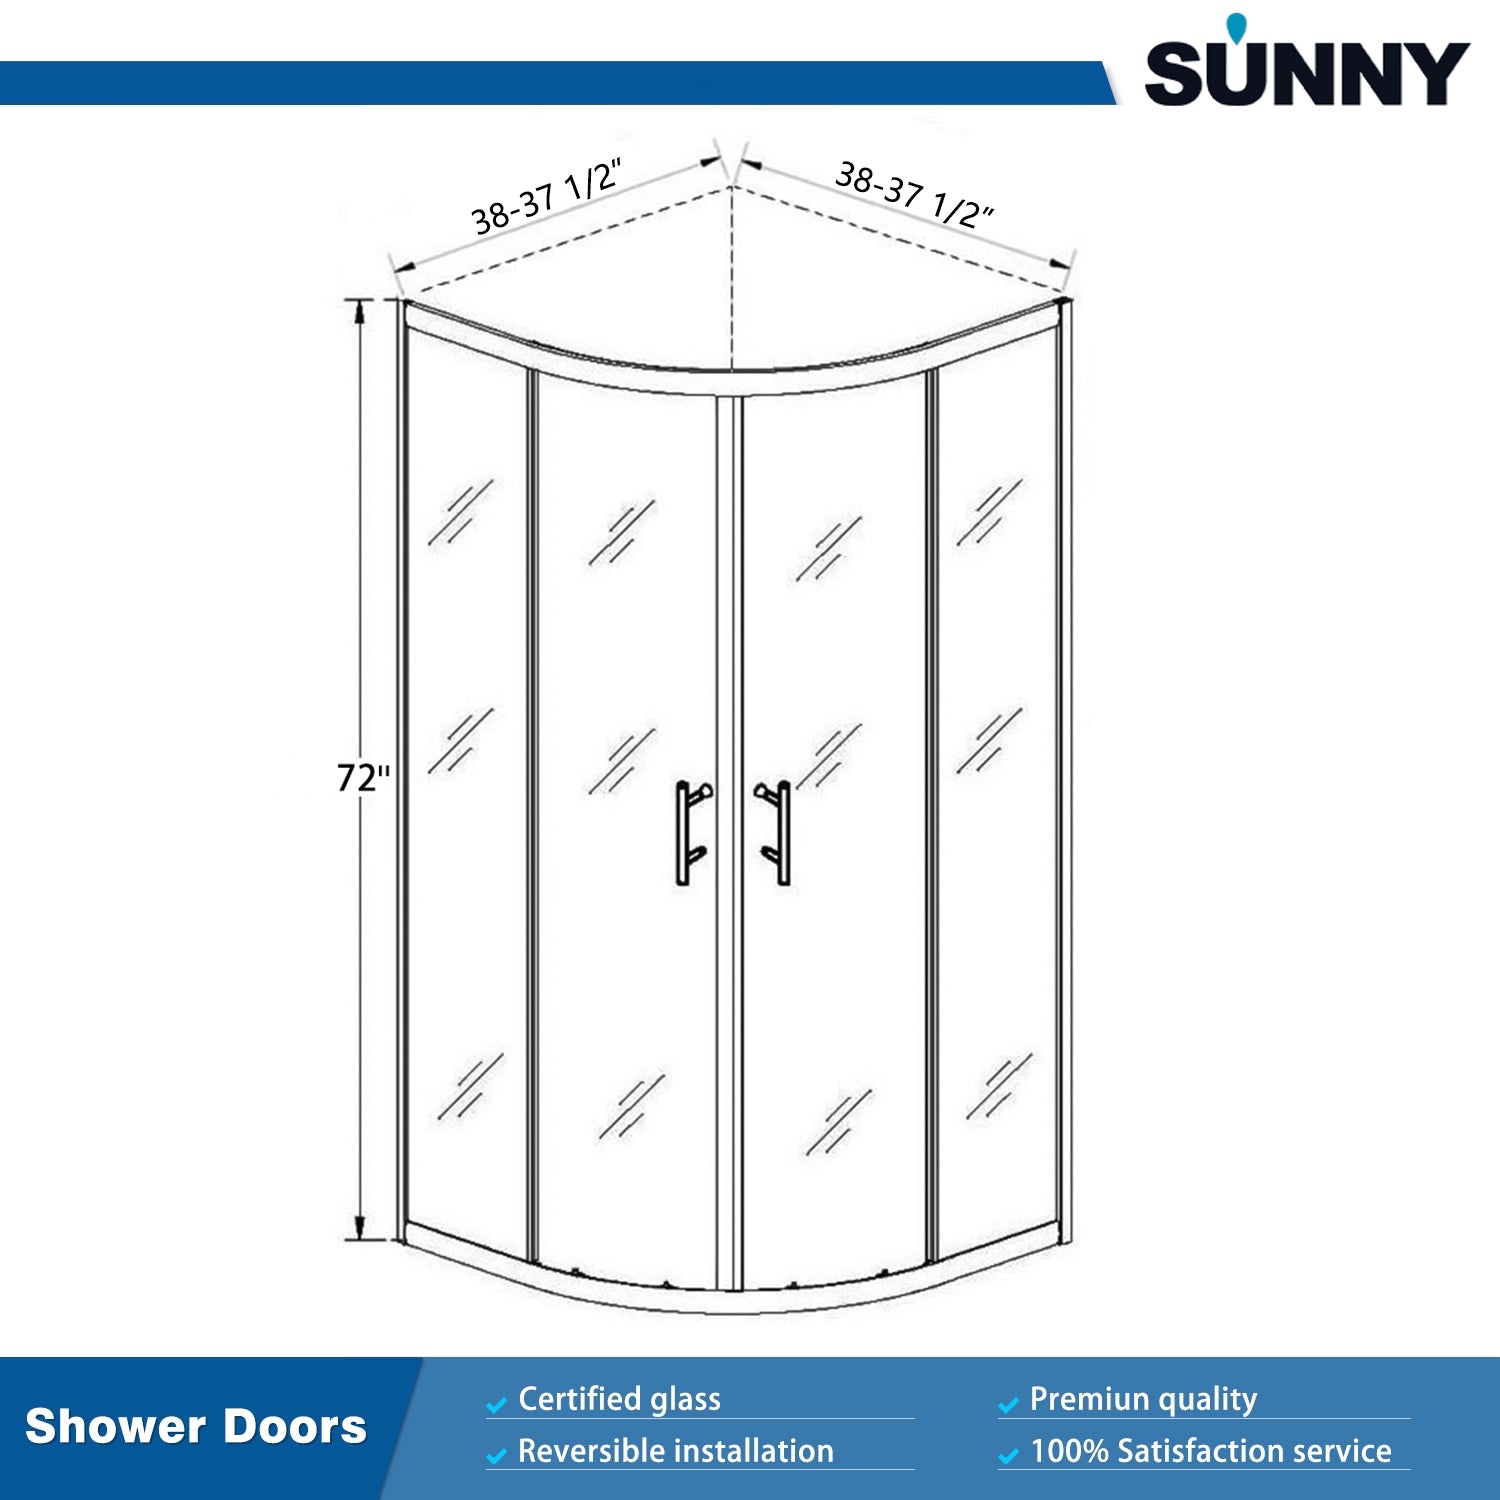 SUNNY SHOWER 38 in. D x 38 in. W x 72 in. H Black Finish Quadrant Enclosures With Sliding Doors Size Chart